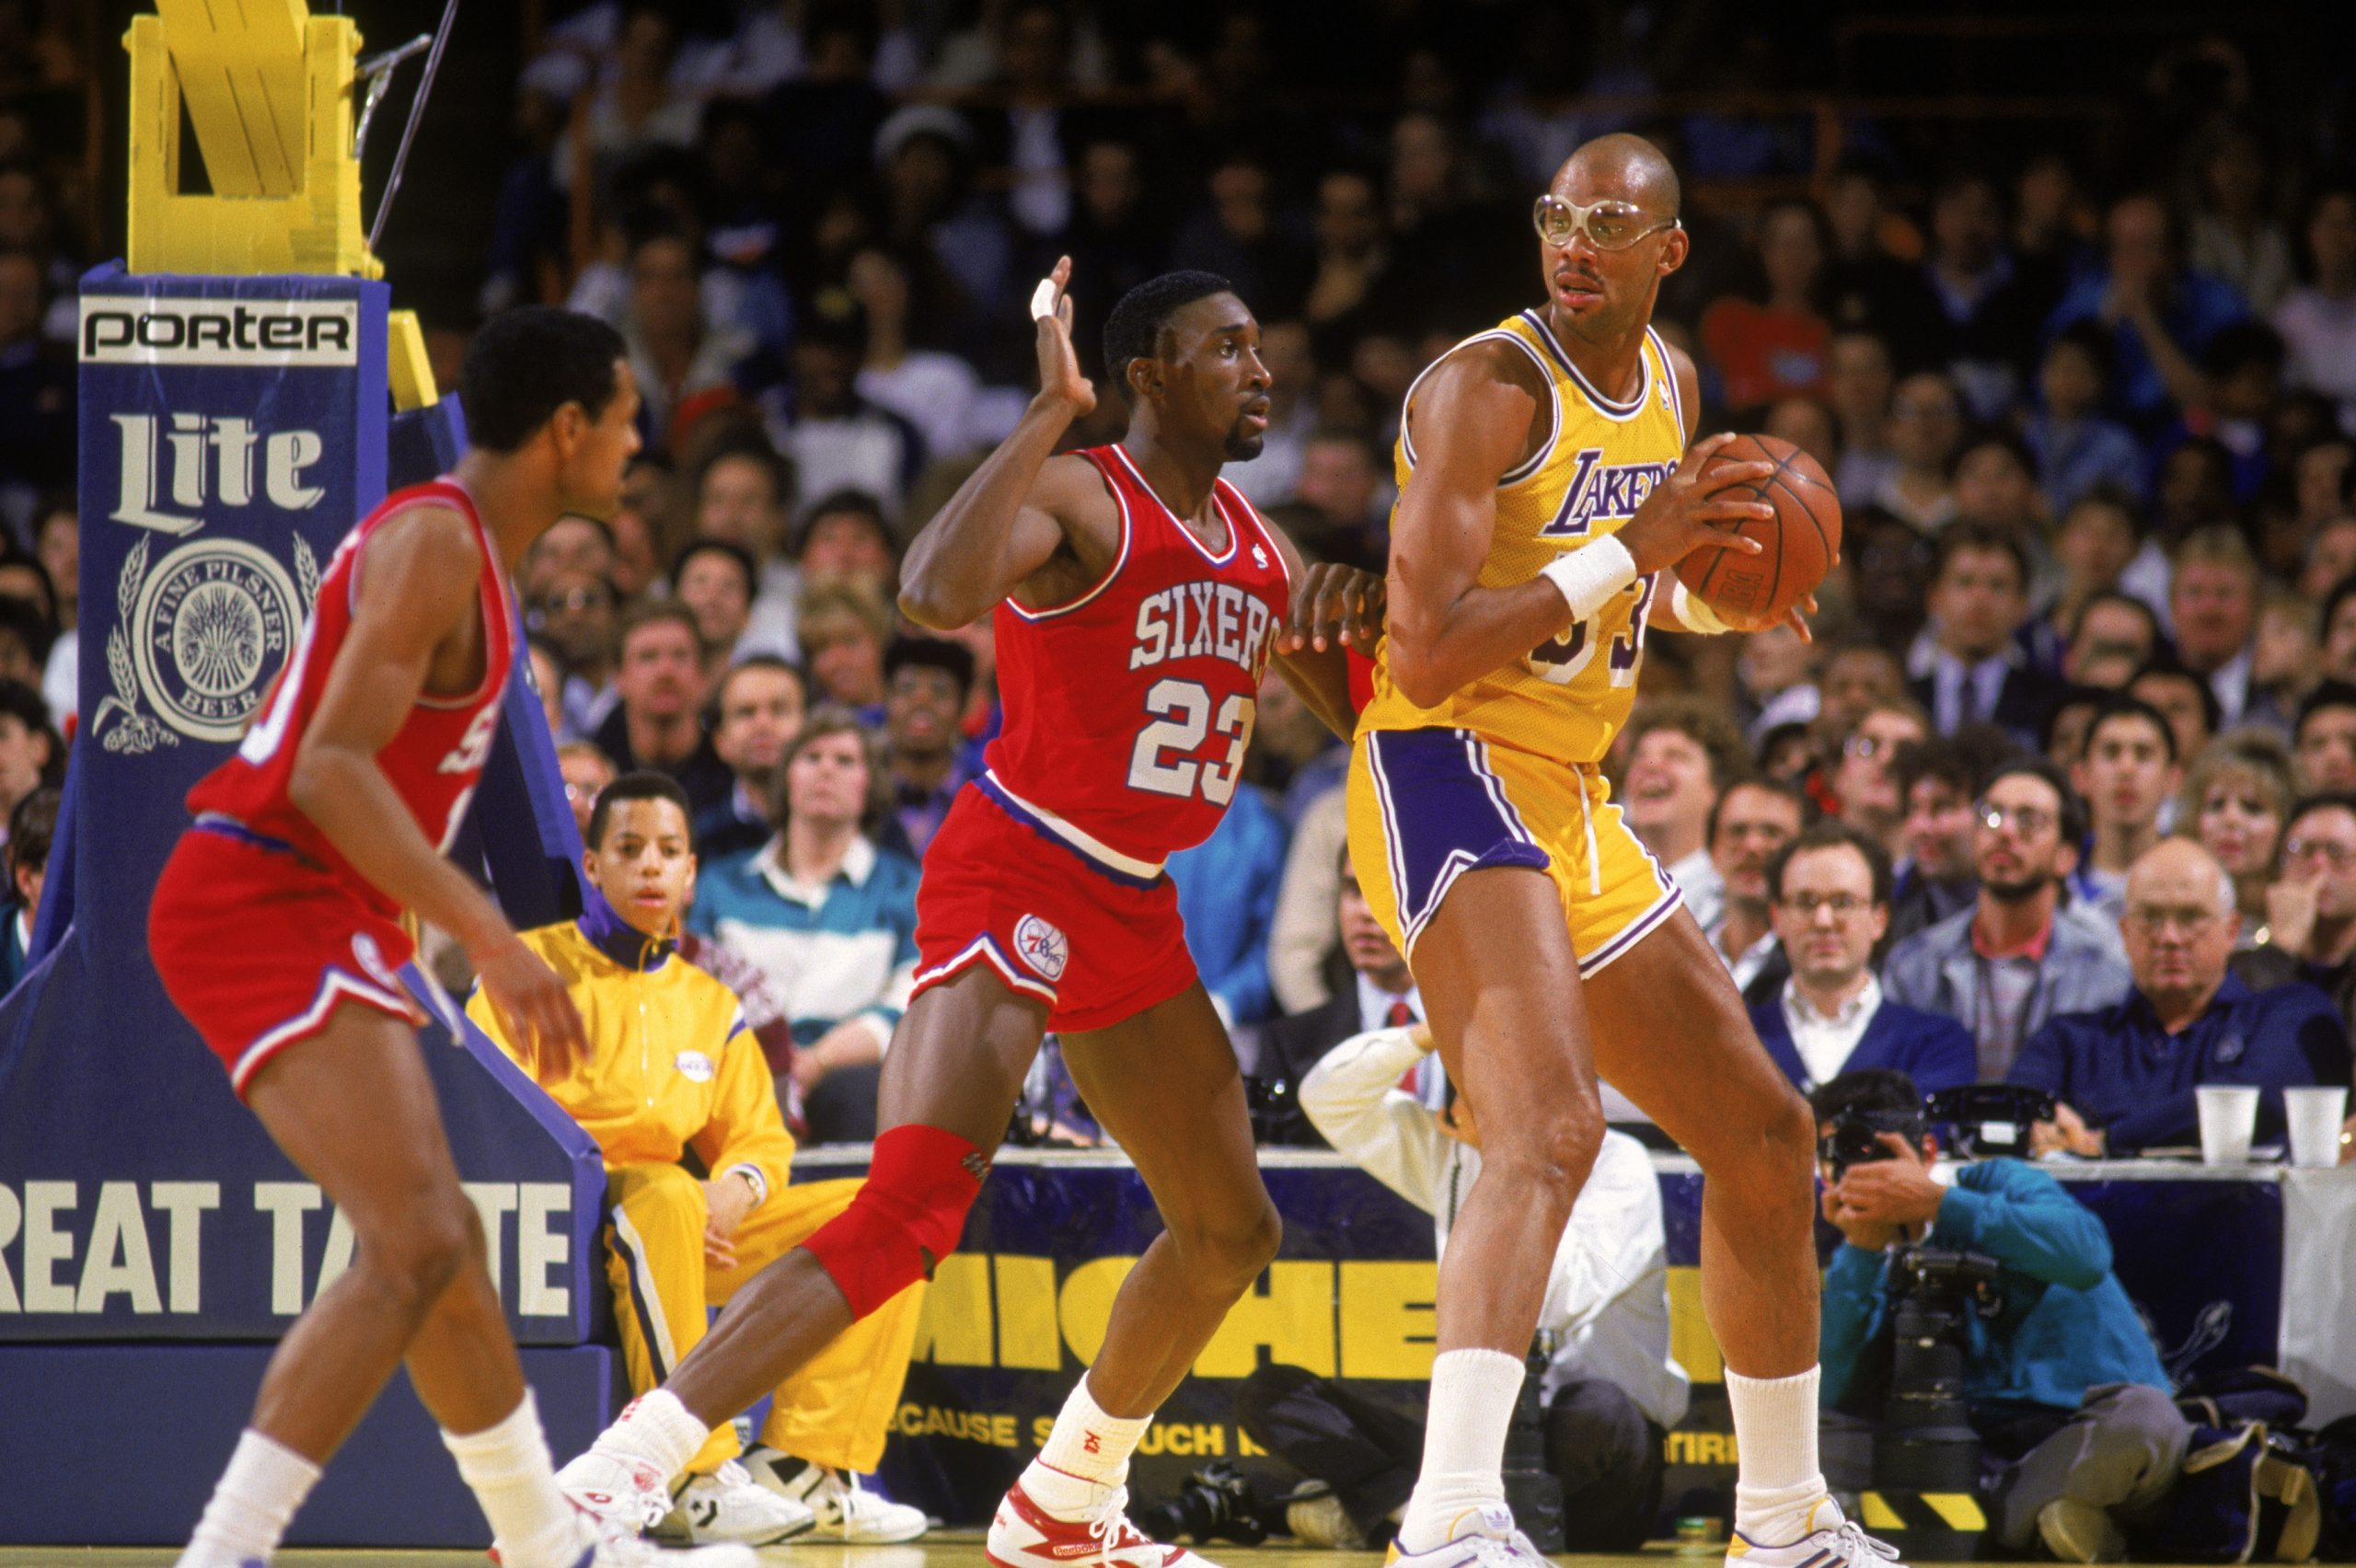 Kareem Abdul-Jabbar of the Los Angeles Lakers holds the ball in the post.